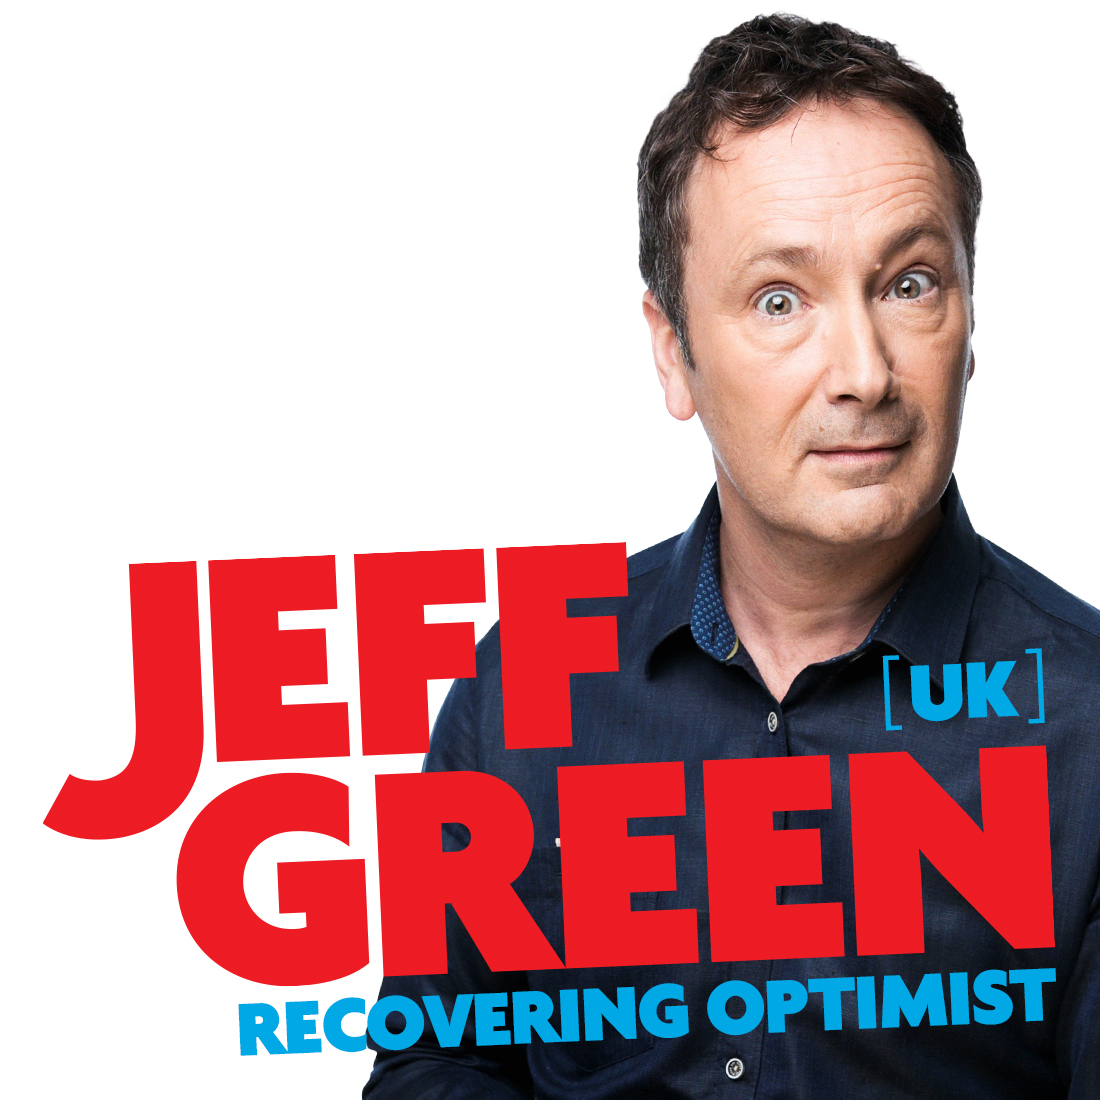 Jeff Green, wearing a dark navy blue buttoned shirt, looks directly into the camera with a slightly shocked but amused expression. The background is white, and written across the image is JEFF GREEN (UK) in red letters and: RECOVERING OPTIMIST in light blue letters, and lots of 4 & 5 stars from media quotes.